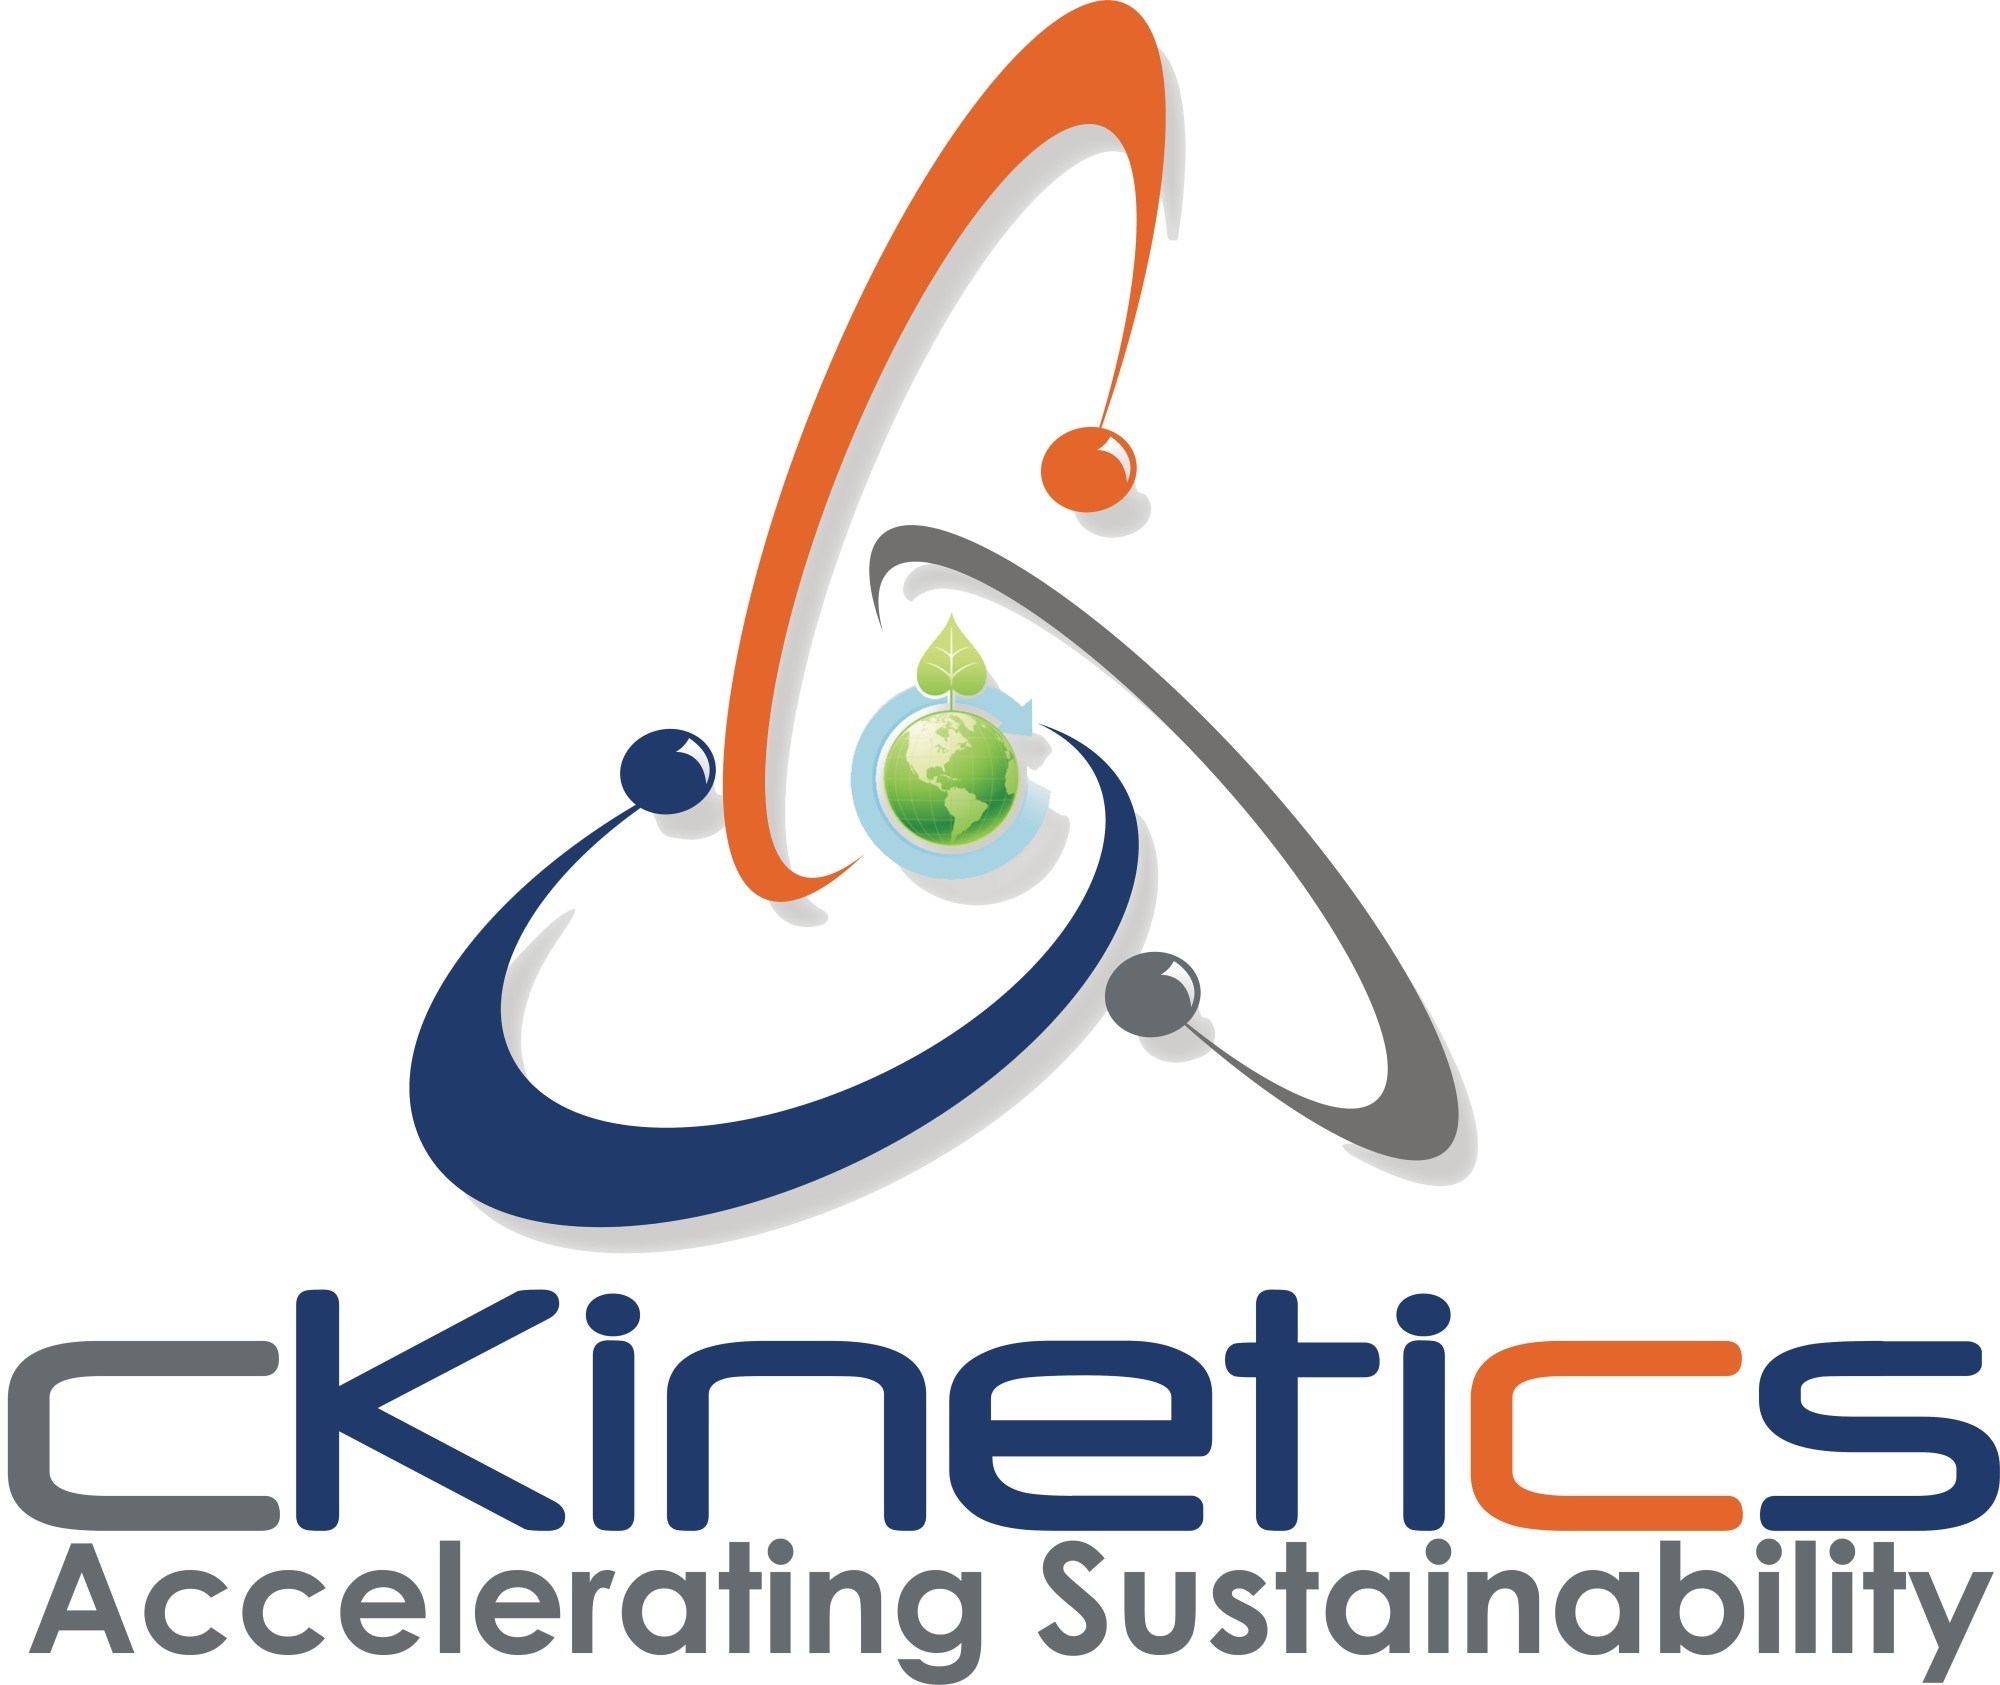 cKinetics acquires CaliforniaCarbon.info business and enhances offerings in the Climate Analytics space